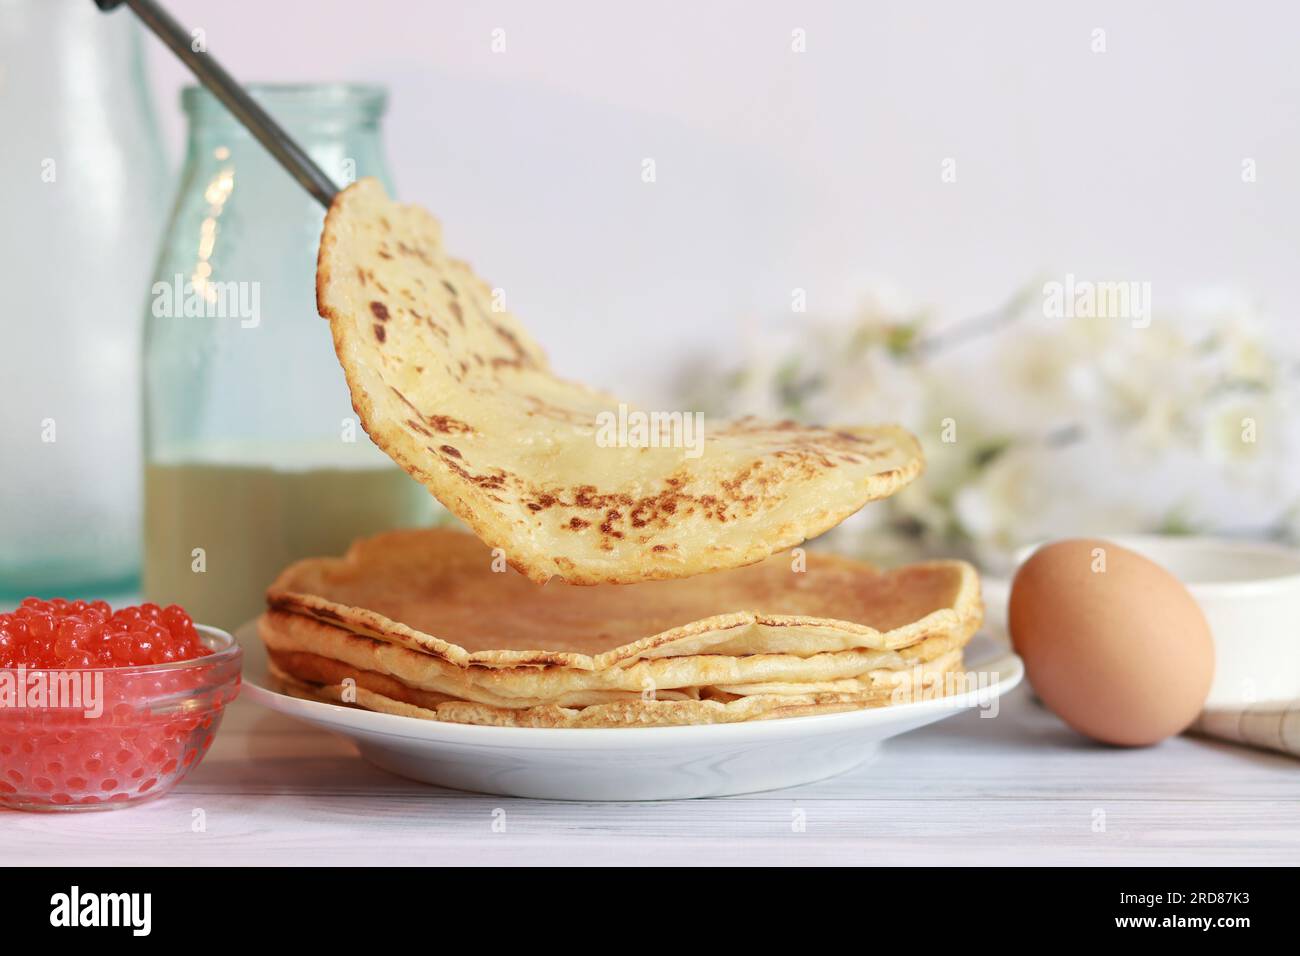 Alamy hi-res made pancakes stock images and Ready photography -